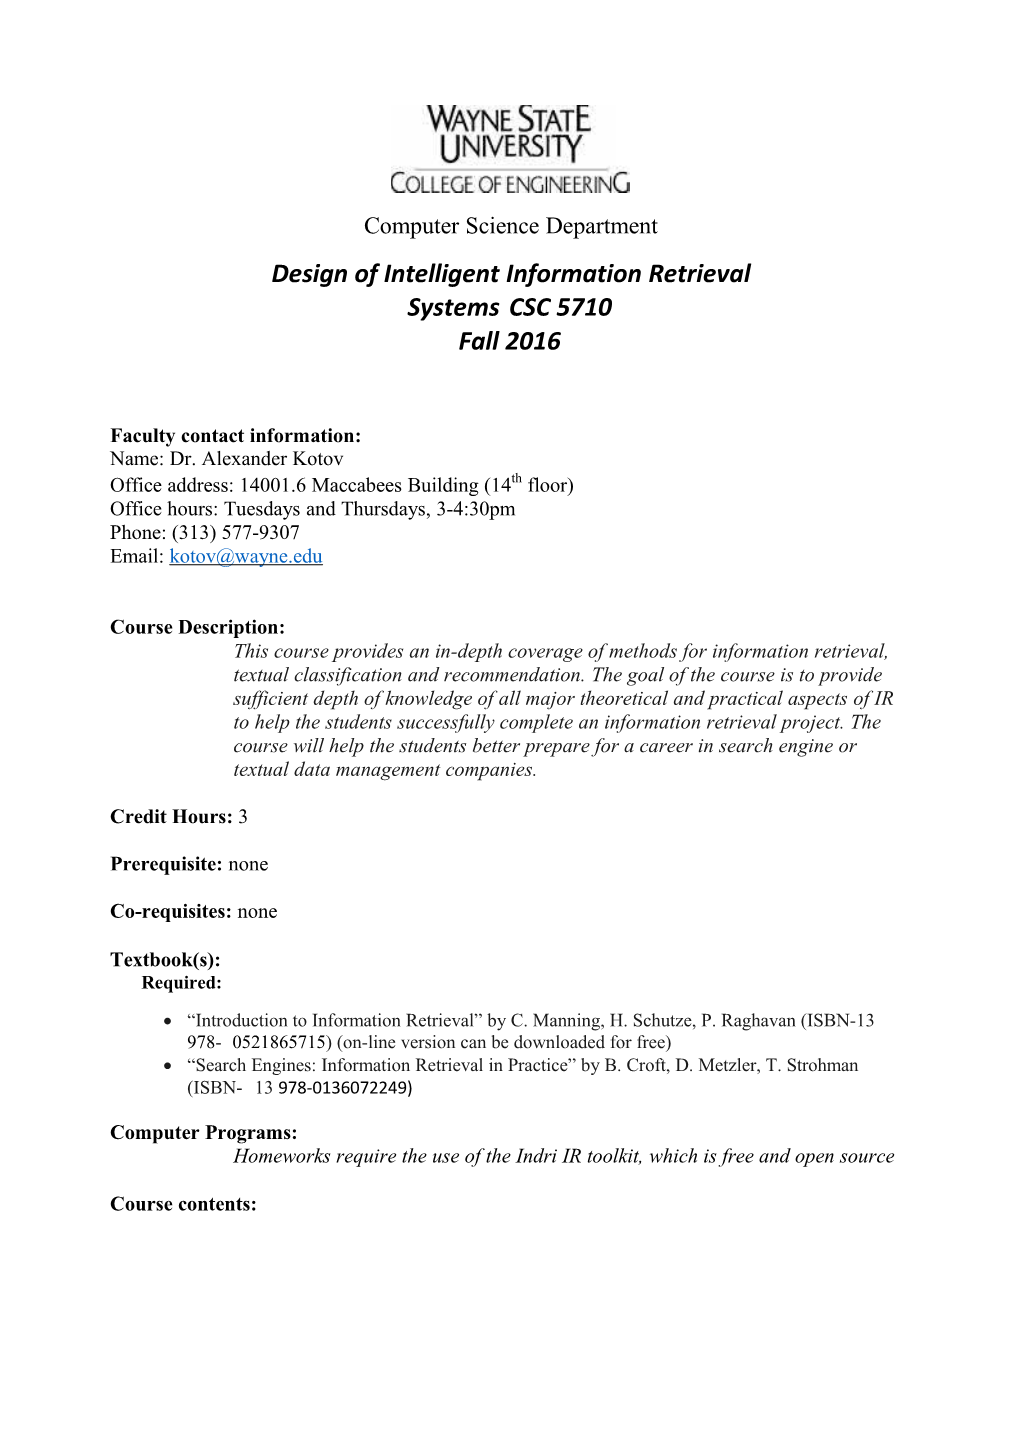 Design of Intelligent Information Retrieval Systems CSC 5710